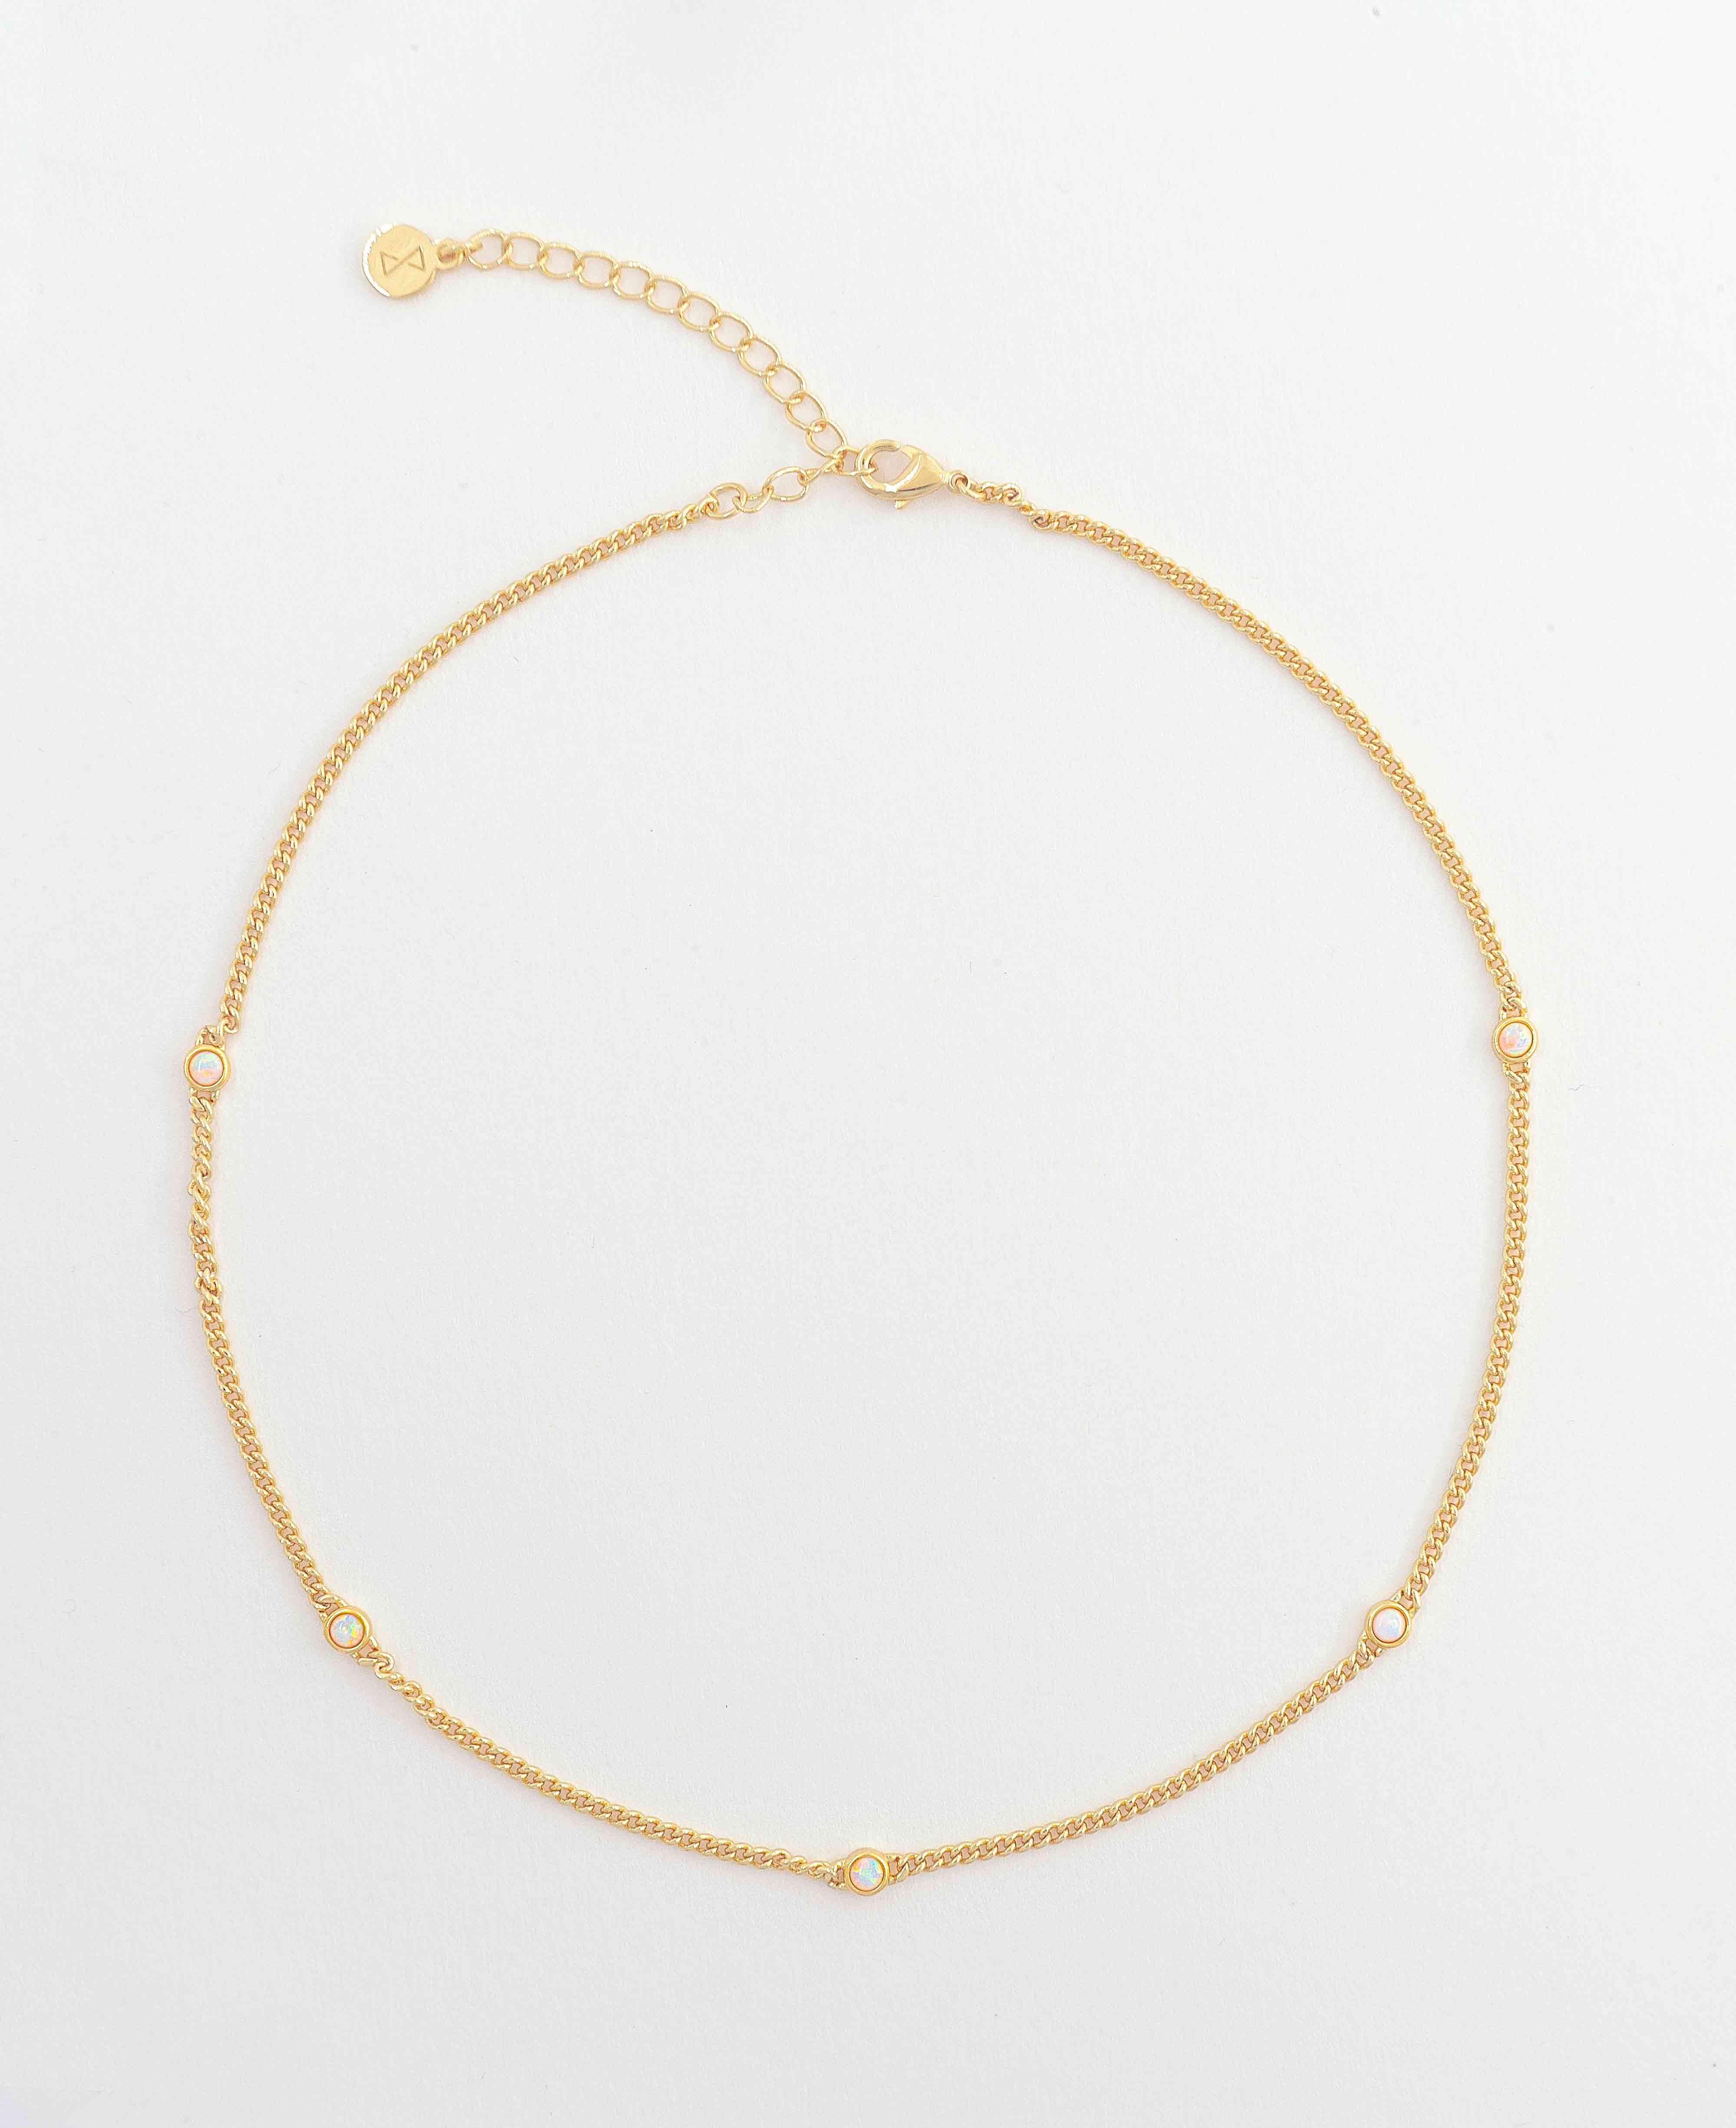 Full view product shot of Thea Opal Gold Necklace